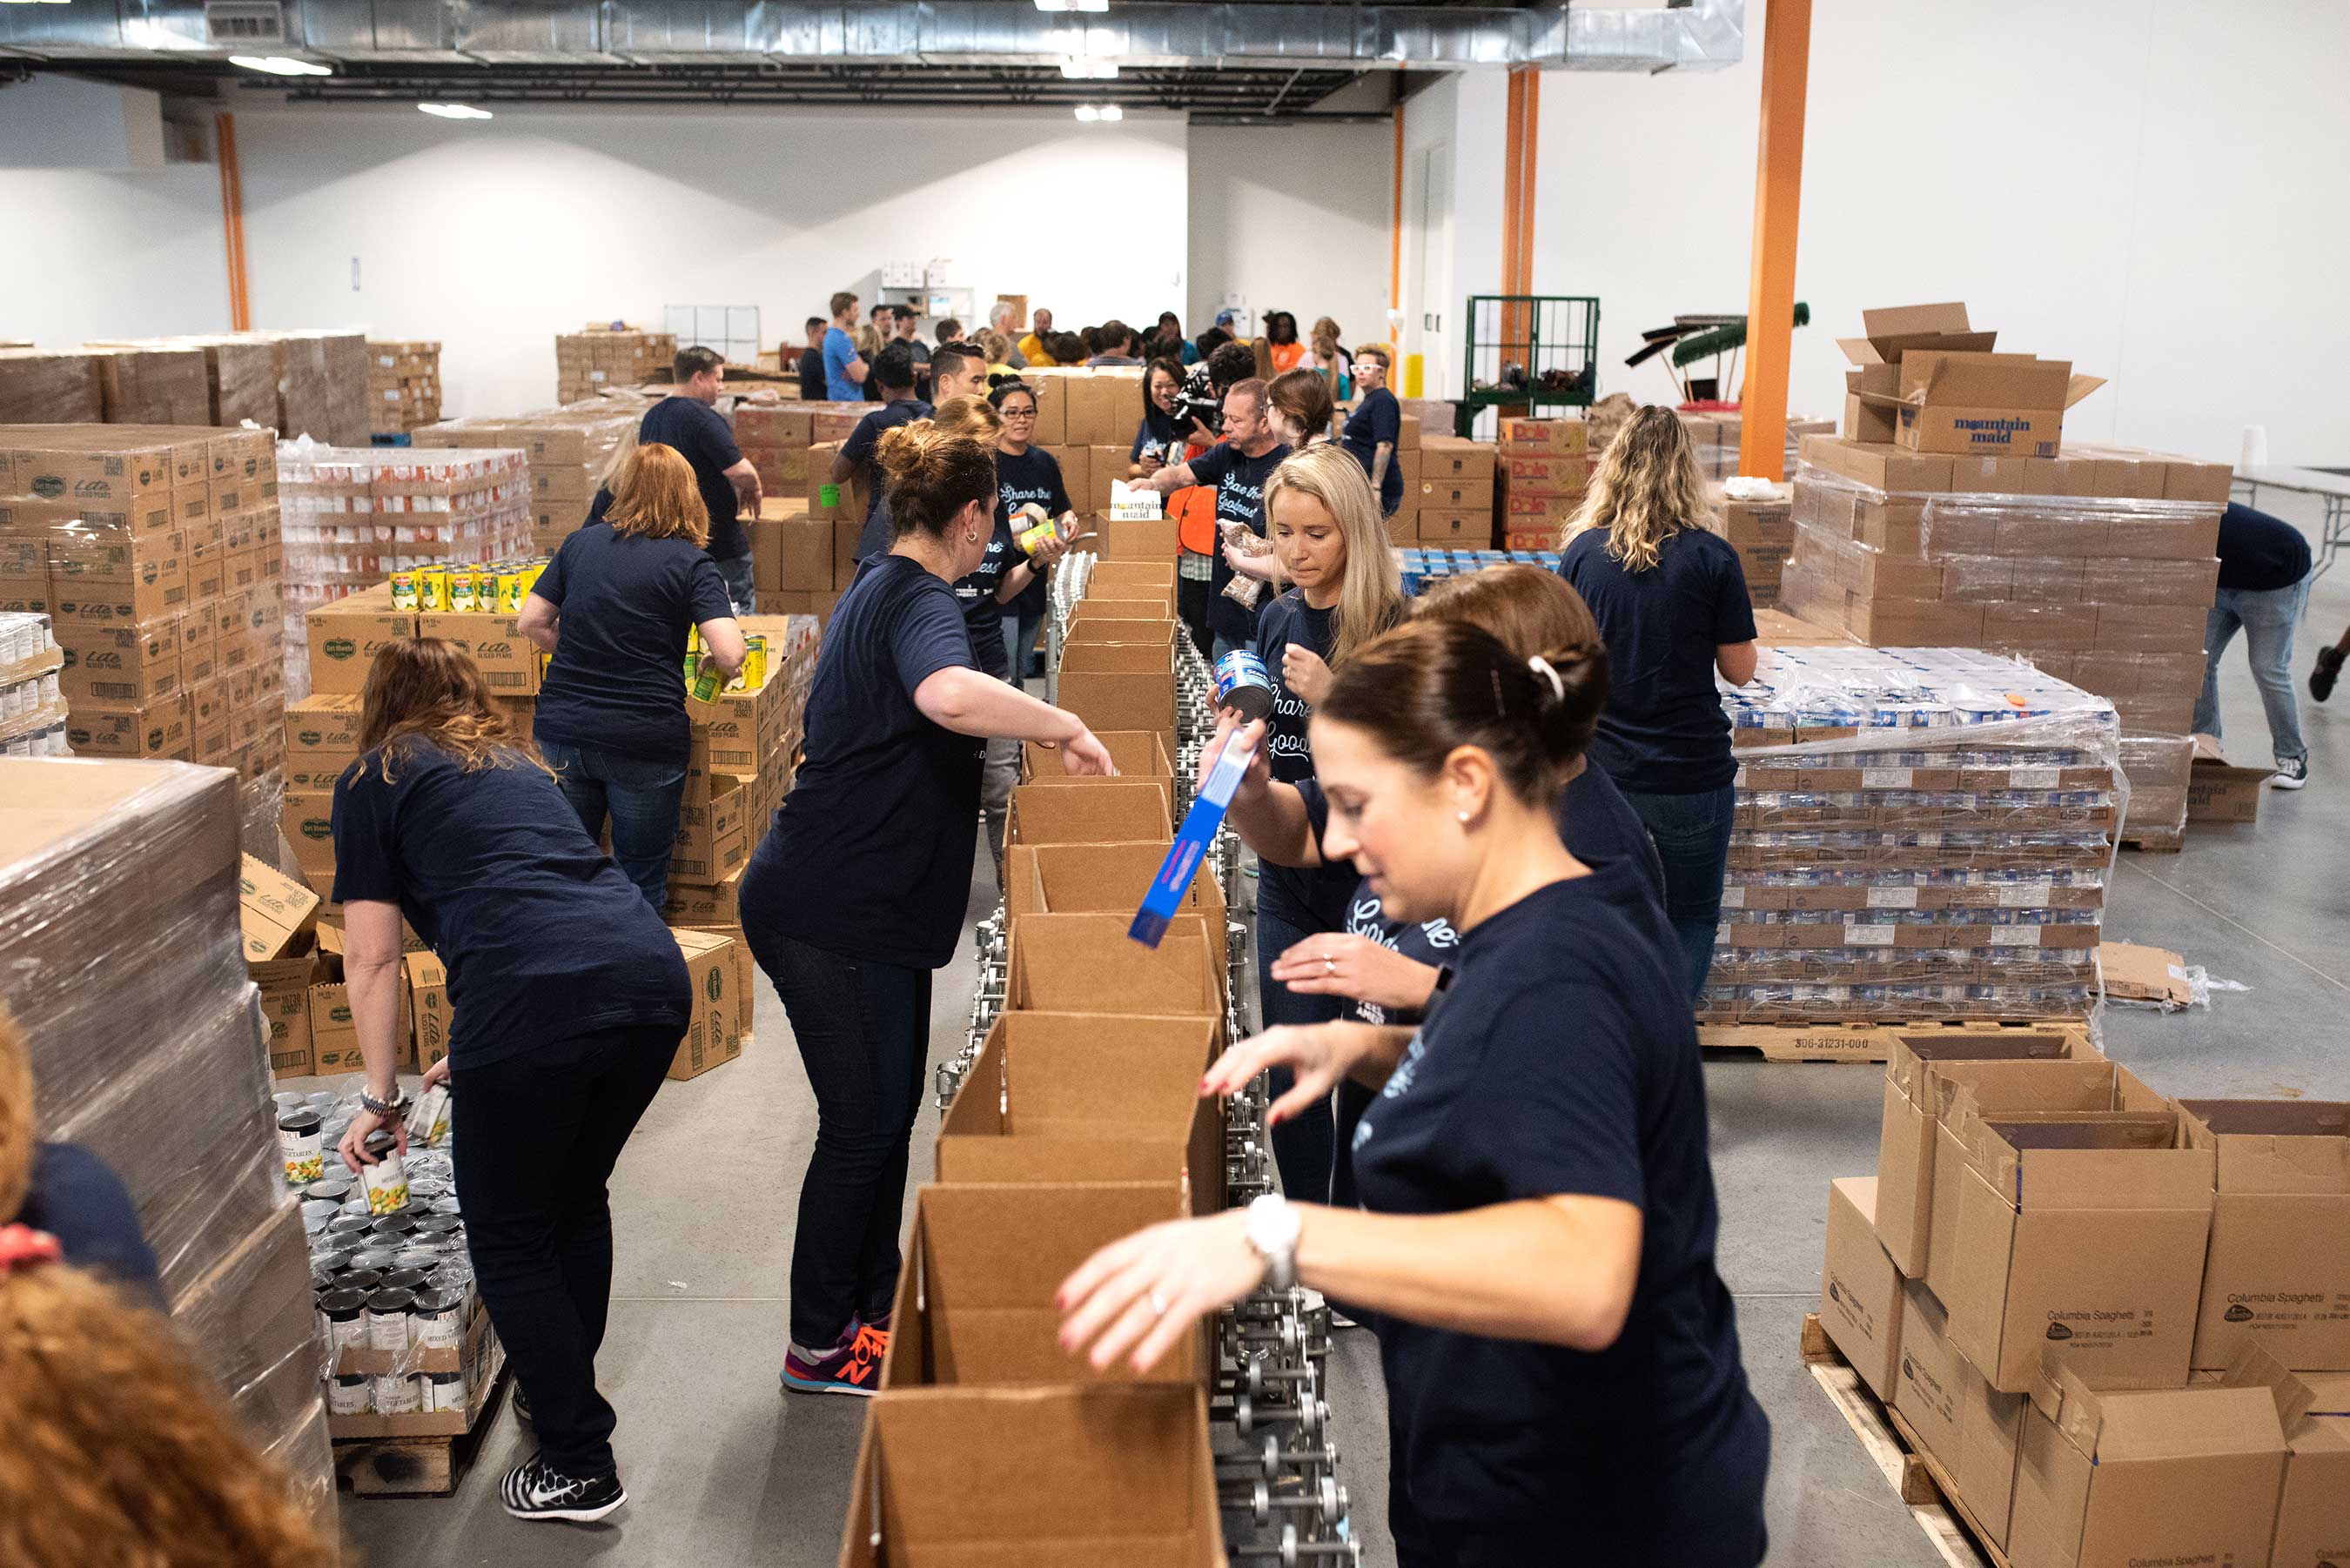 To kick off this year's campaign, Dean Foods employees volunteered at the North Texas Food Bank in October to help provide meals to those in need.